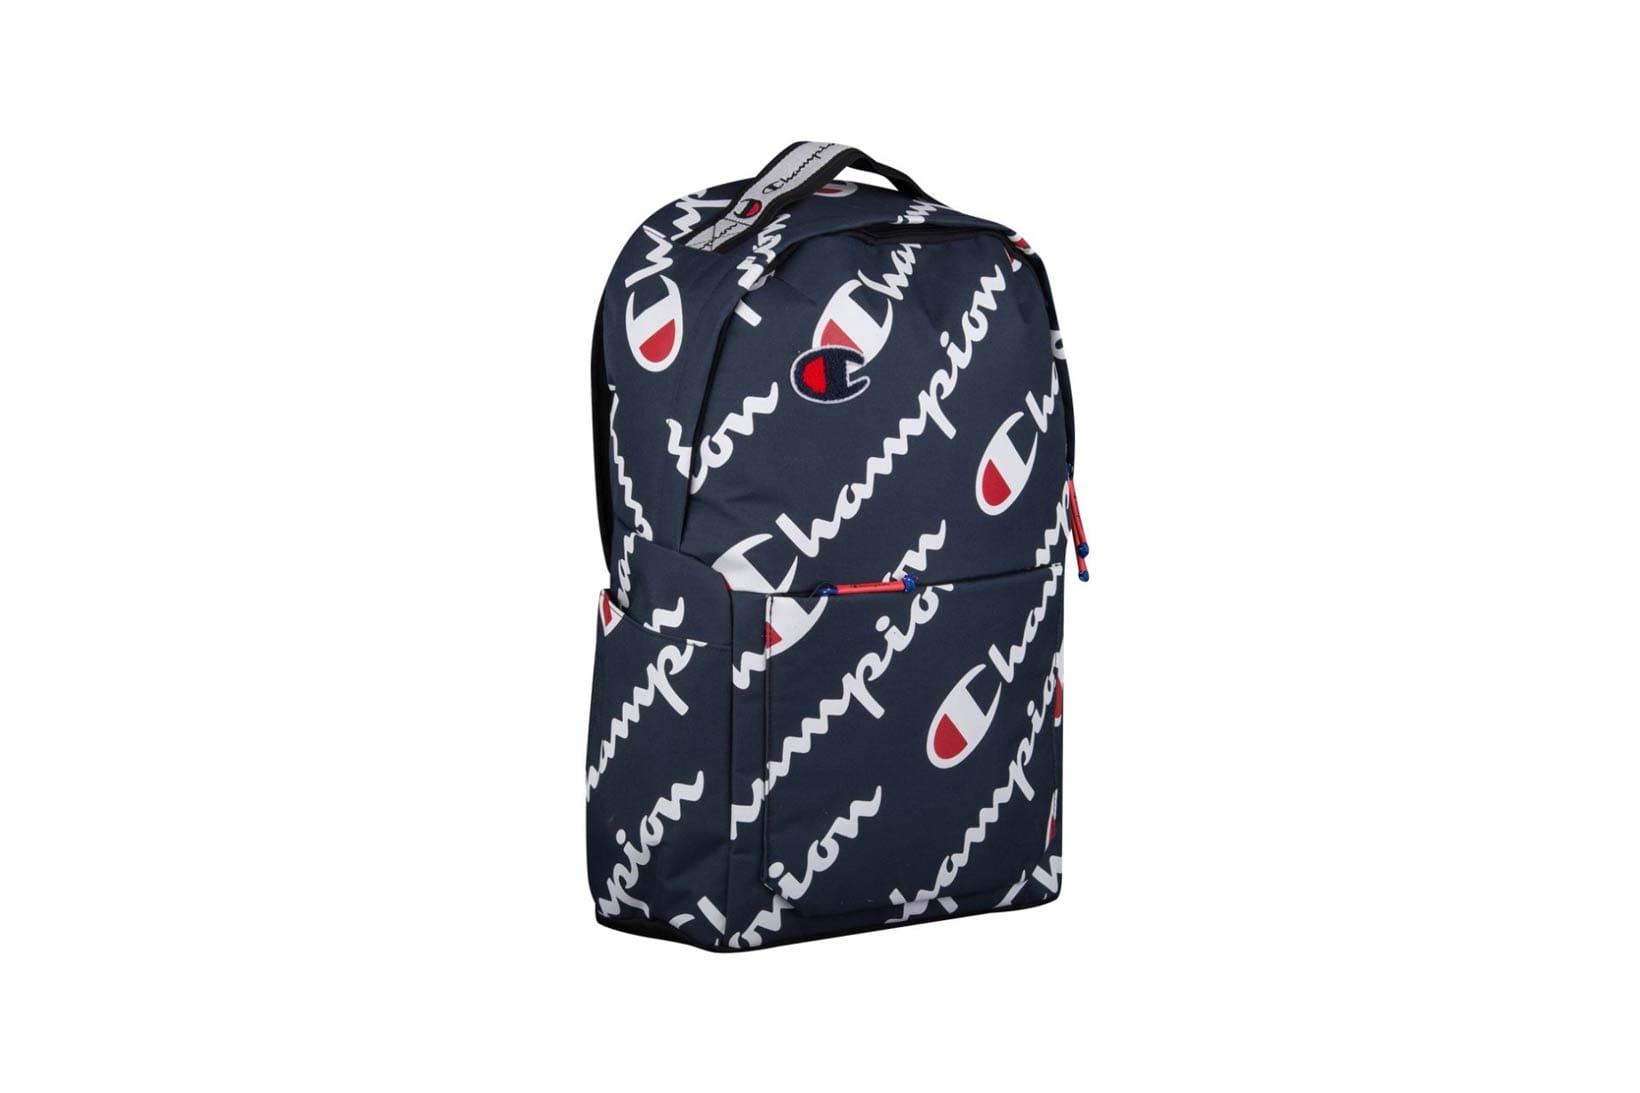 champion backpack navy blue